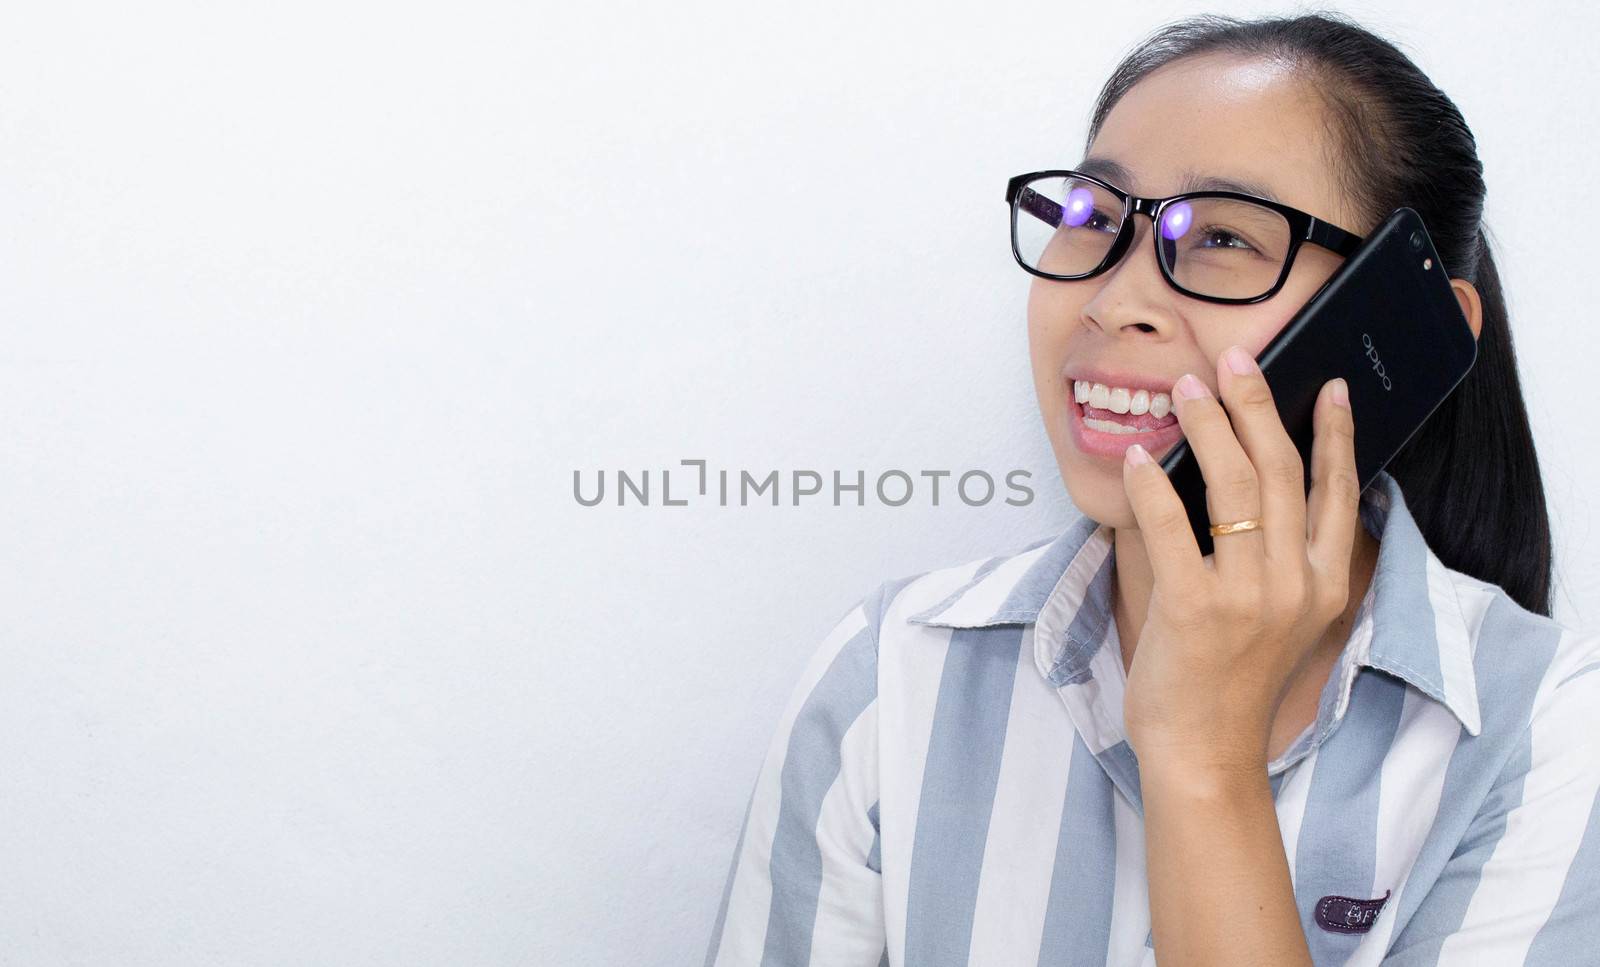 Cheerful Business Asian young woman talking on the phone over white background, Happy and smiling face.